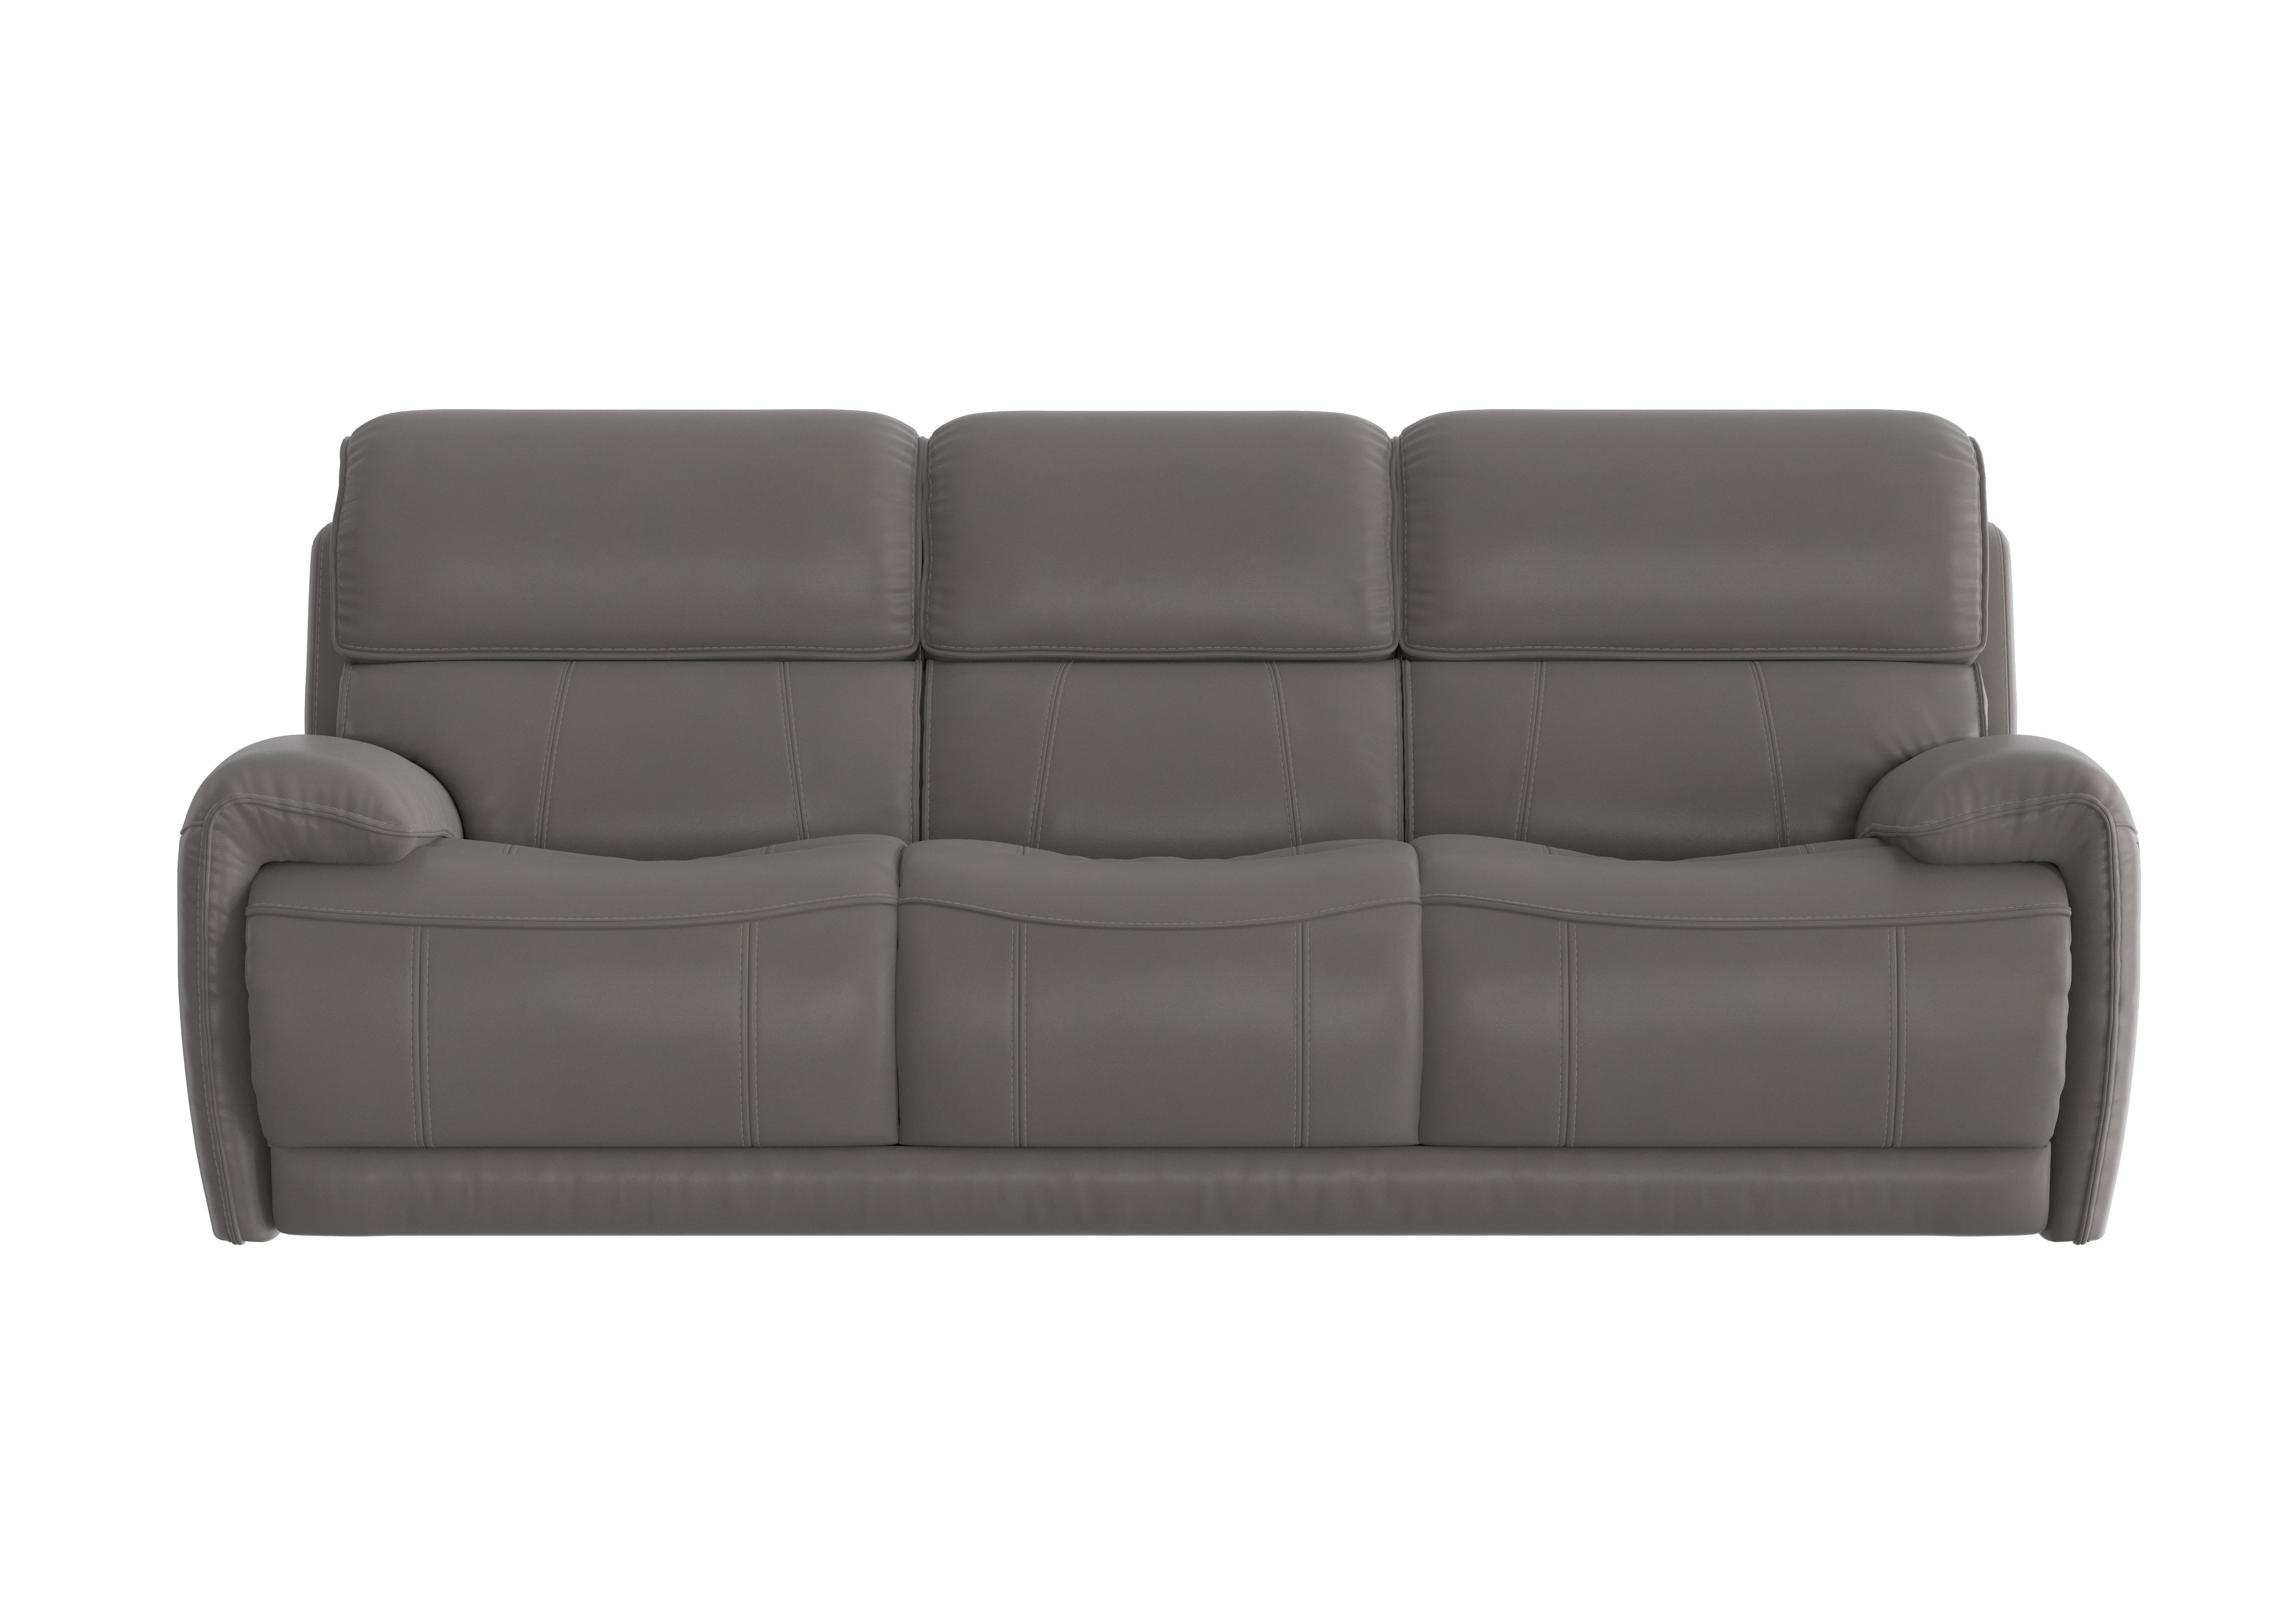 Link 3 Seater Leather Sofa in Bv-042e Elephant on Furniture Village